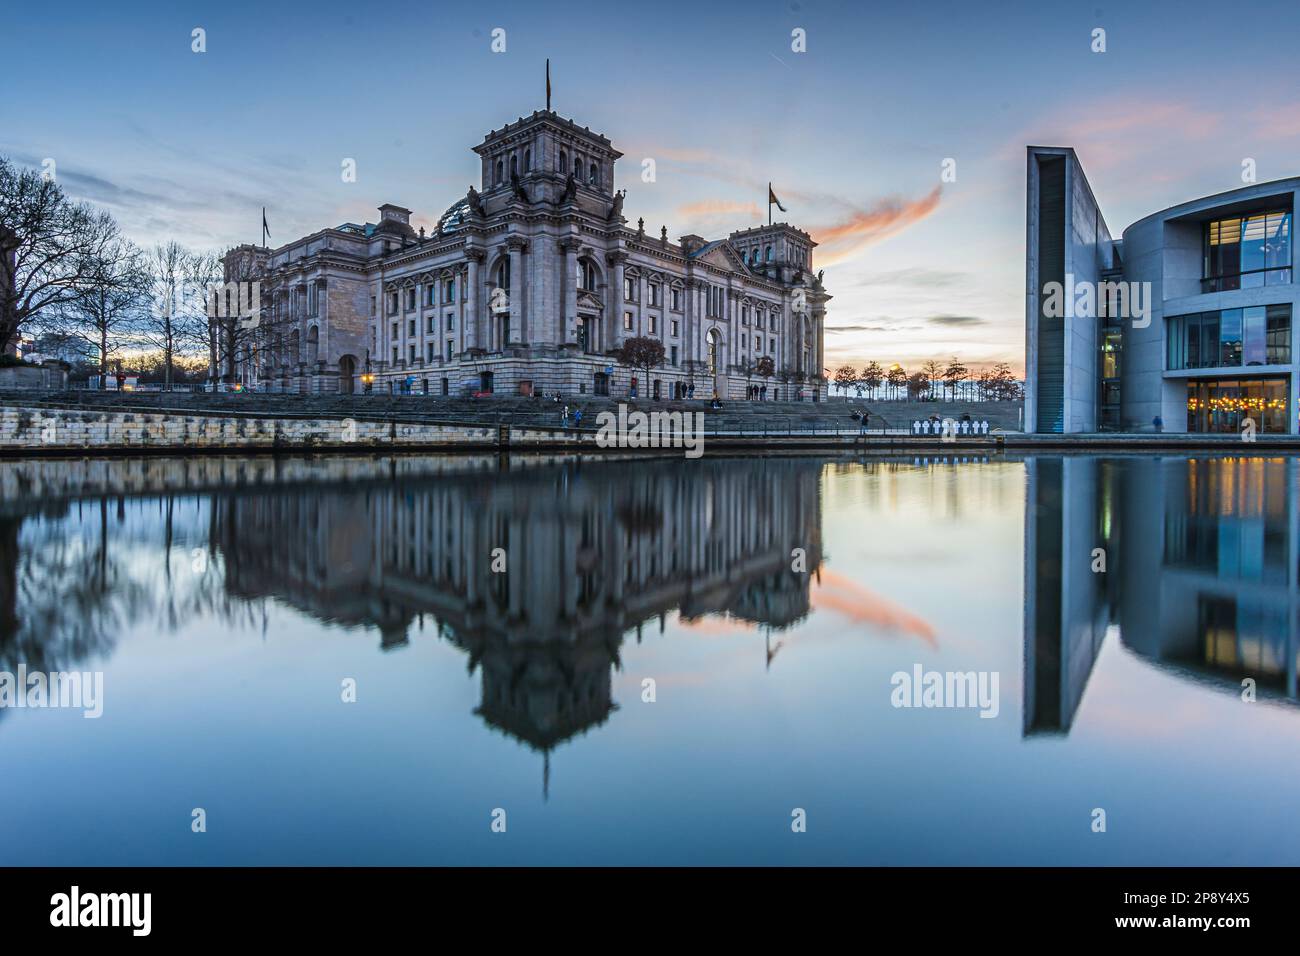 Sunset over the government district in Berlin.Reichstag in the capital of Germany in the evening. River Spree in front of the building with reflection Stock Photo